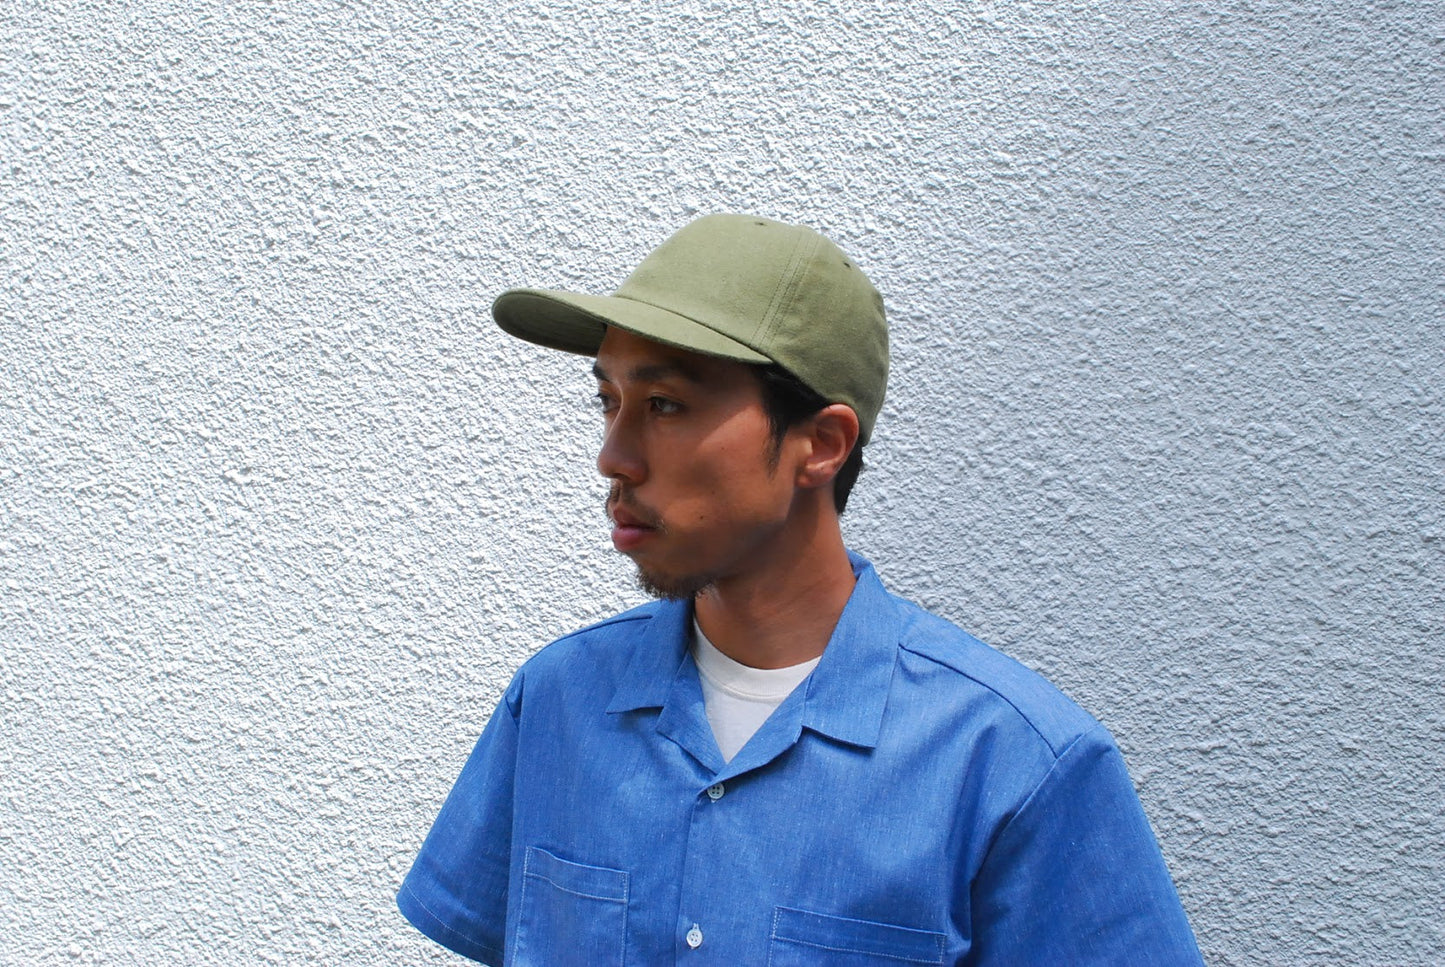 KED CAP (FLANNEL) - GRAY